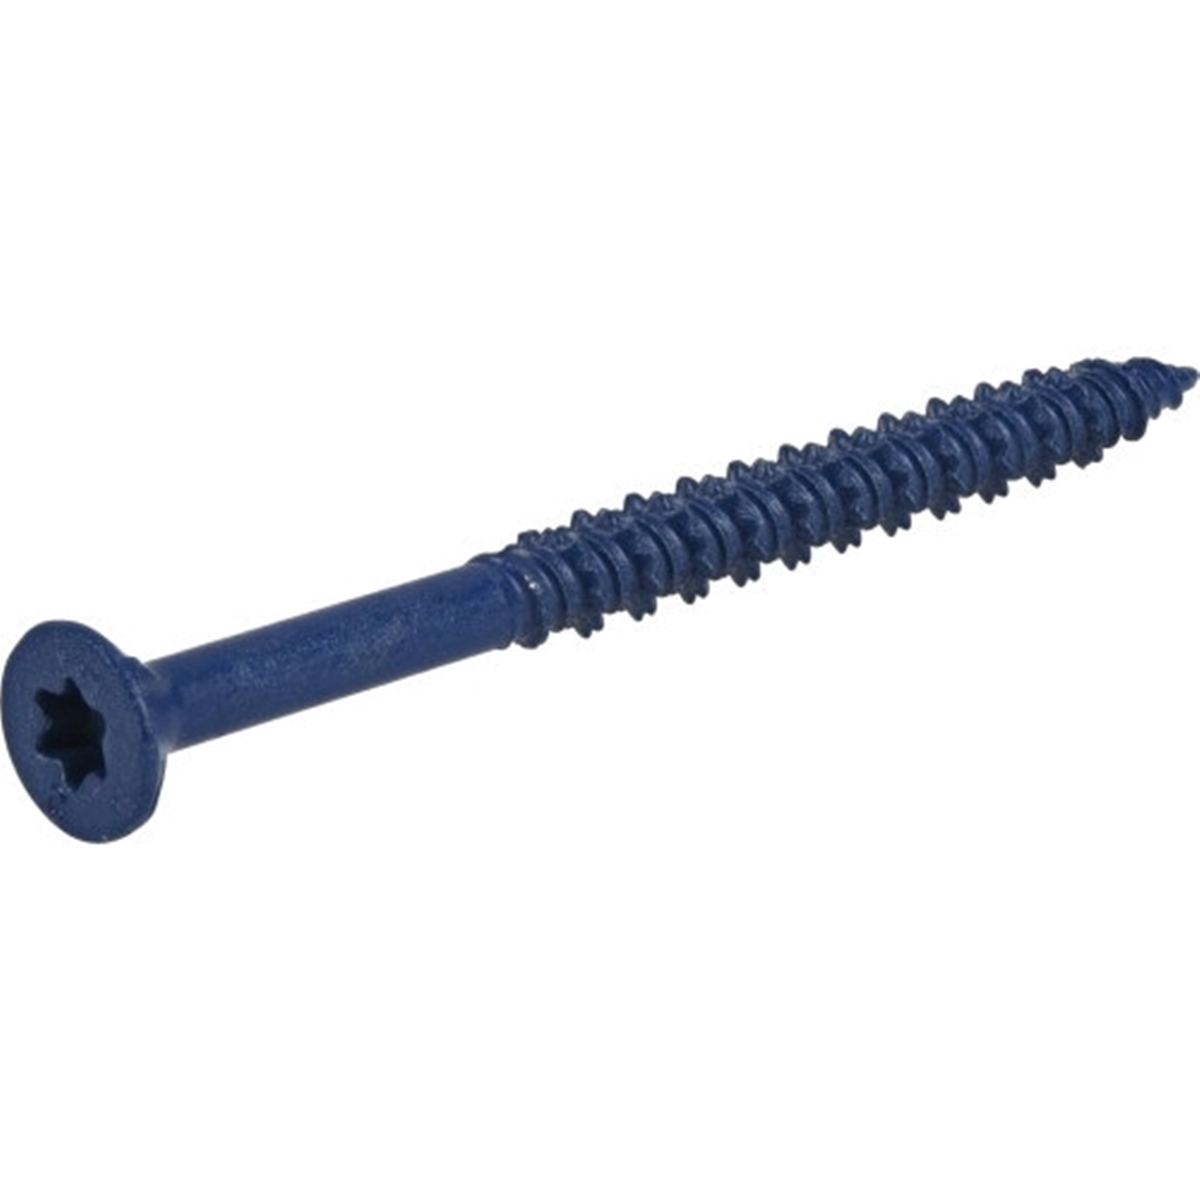 376525 Concrete Screw Anchor, 3/16 in Dia, 2-3/4 in L, Carbon Steel, Epoxy-Coated, 100/PK